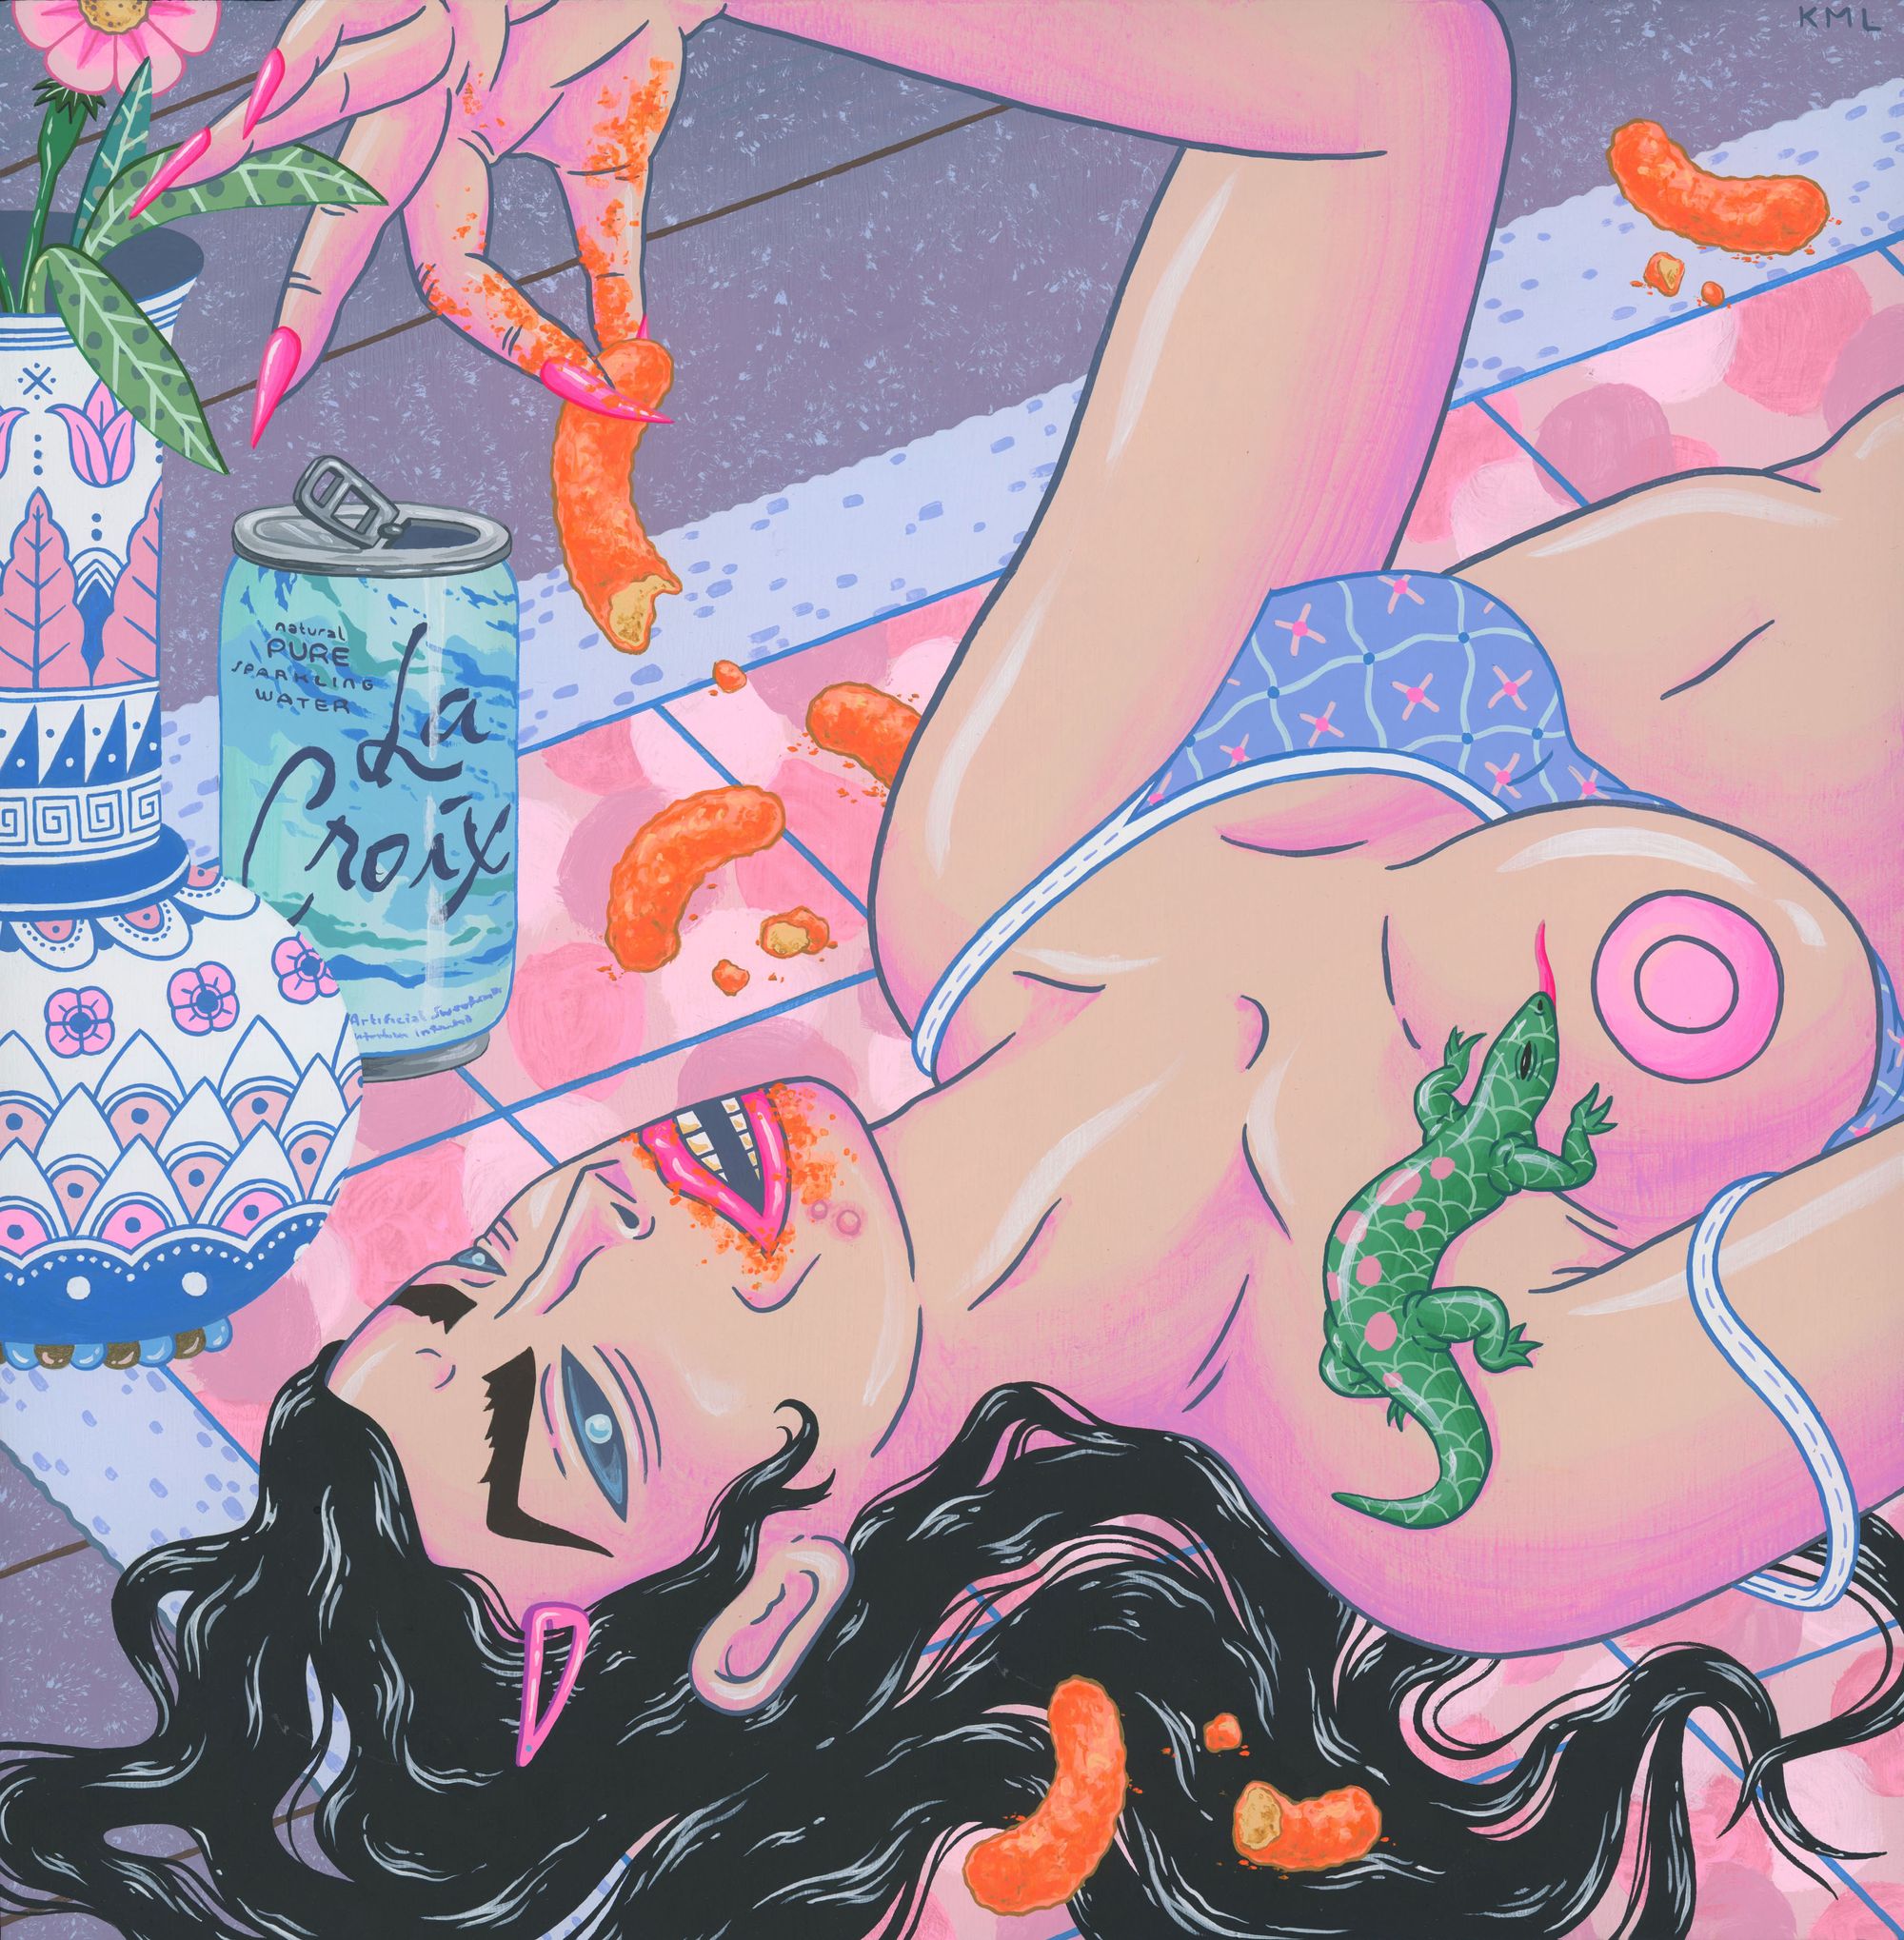 Kristen Liu-Wong's painting called The Craving depicts a raven-haired woman laying on the ground eating cheese puffs.